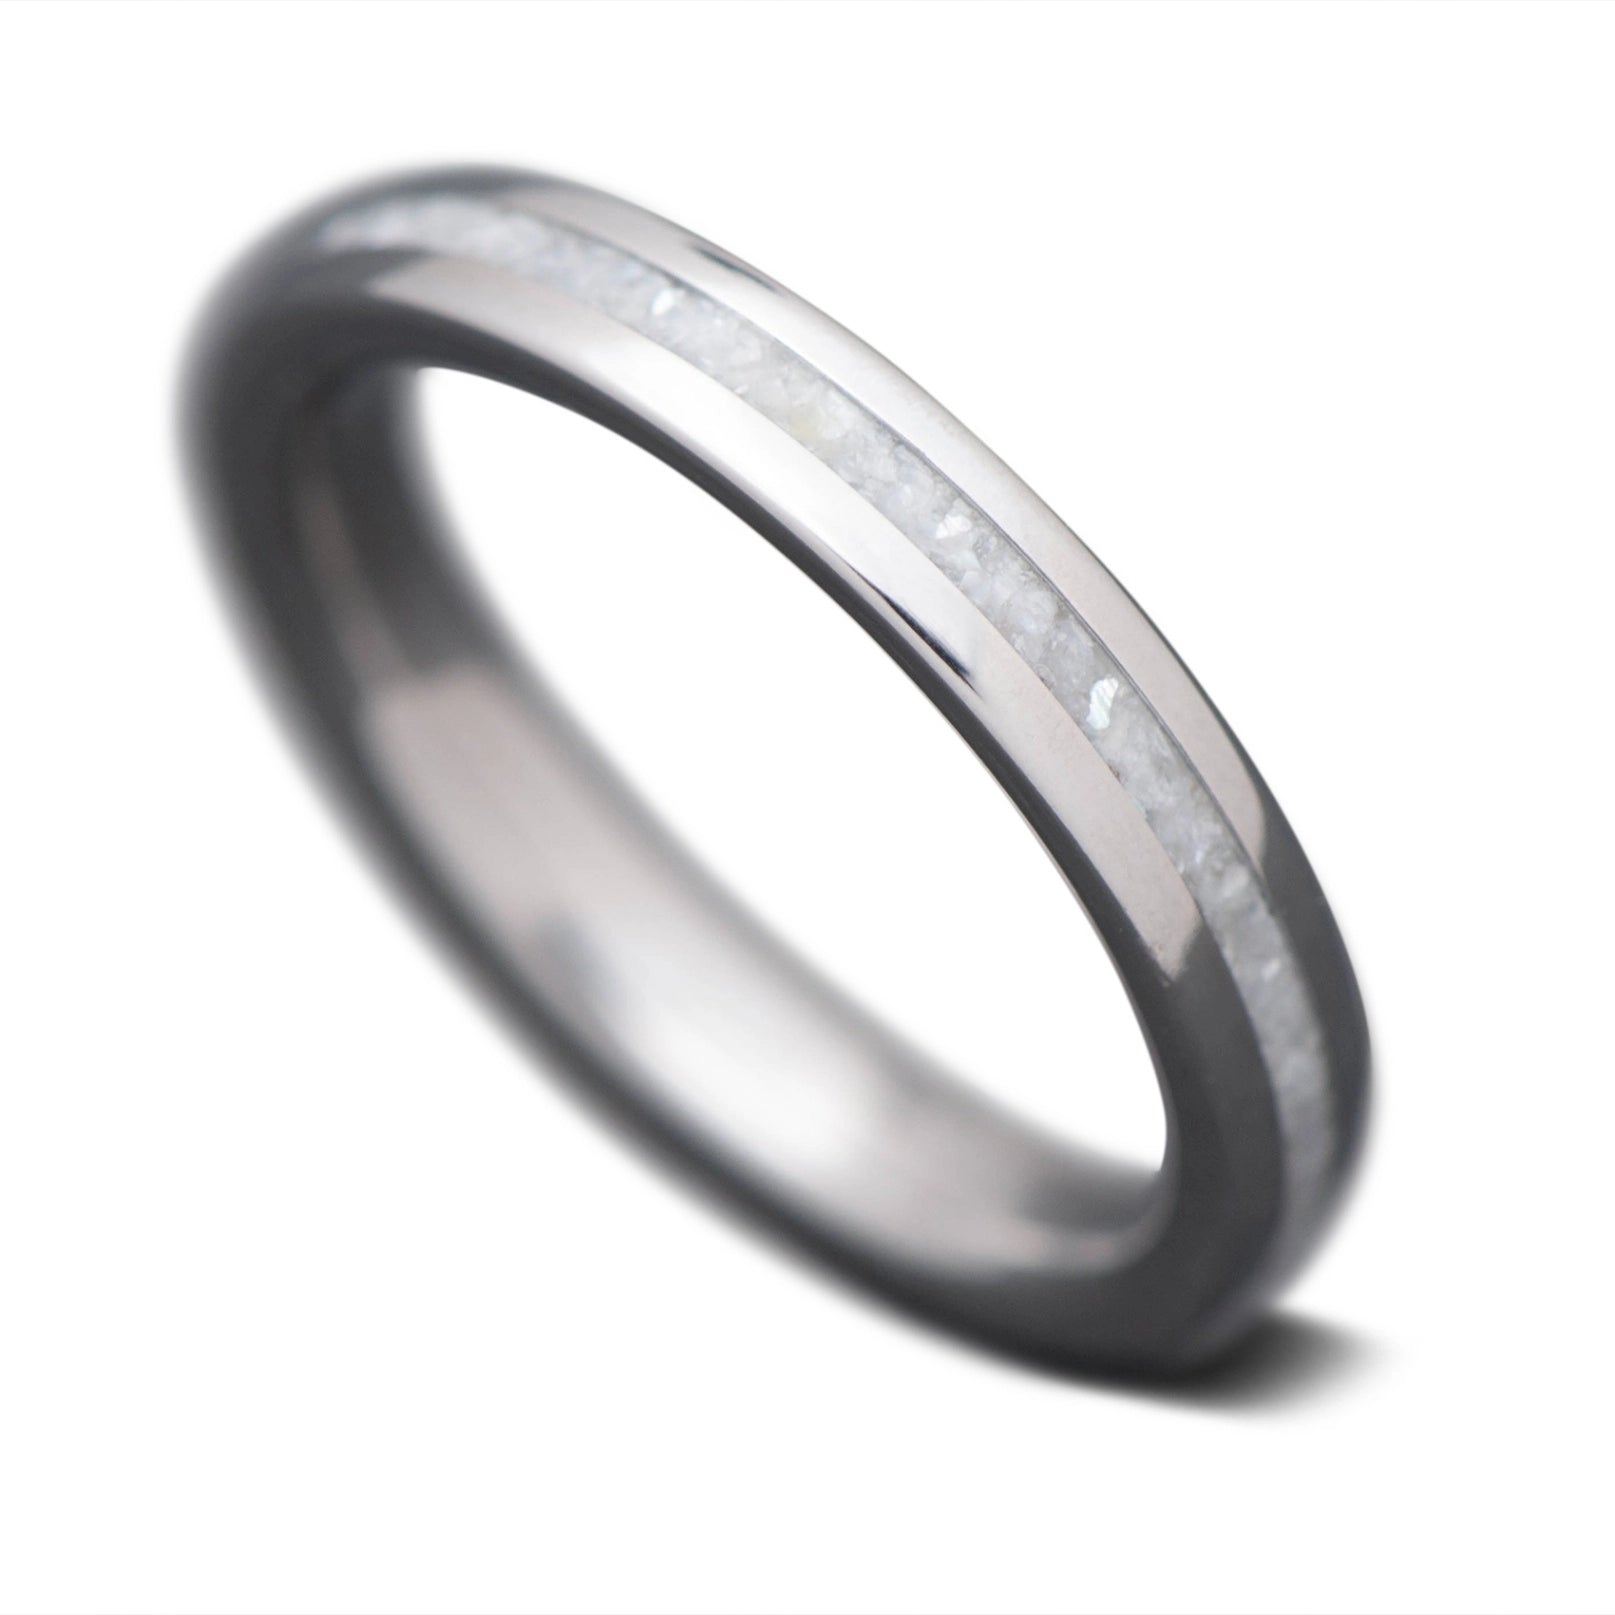 Titanium core ring with pearl inlay, 3mm -THE ANCHOR